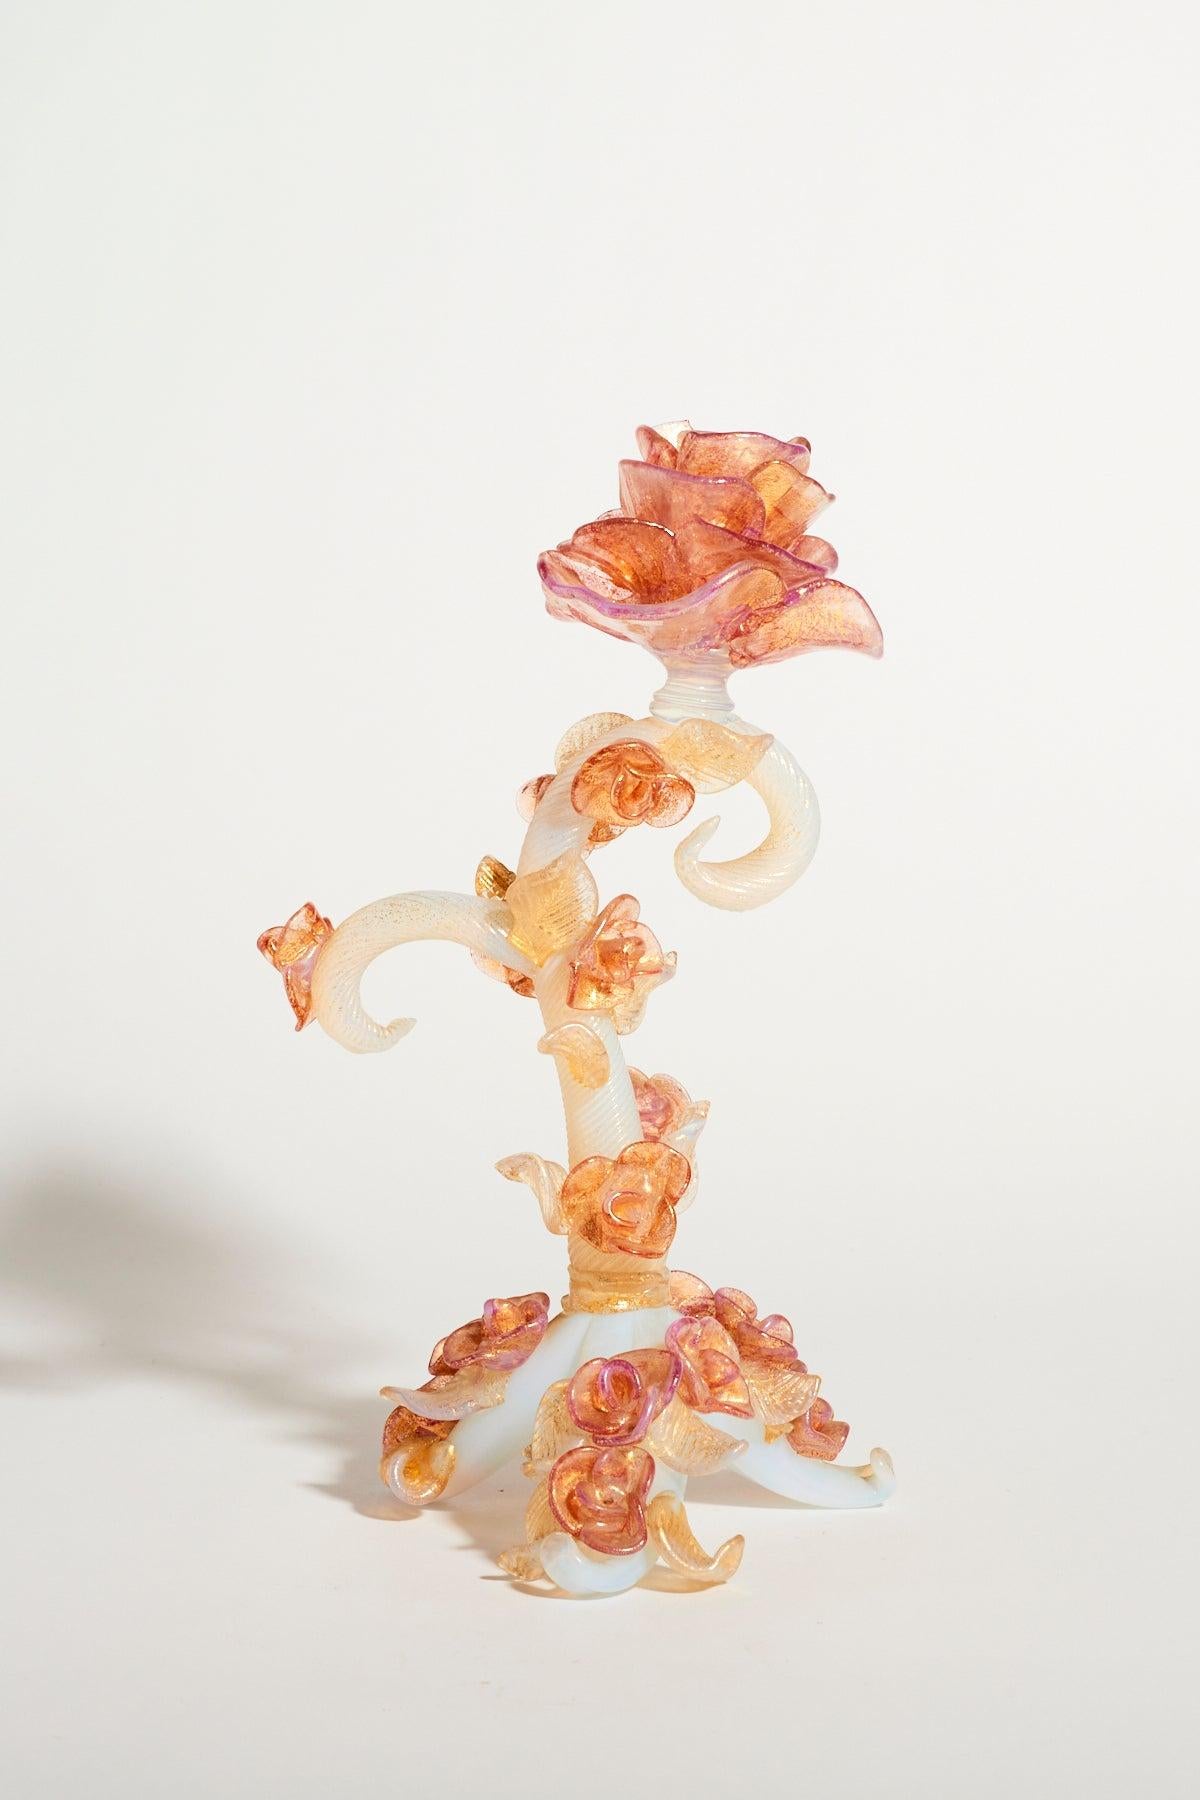 Murano rose vine candle holder, opalescent white stem entwined with buds and leaves in gold flecked peach, pink and clear glass with a full blown rose at the top.
 